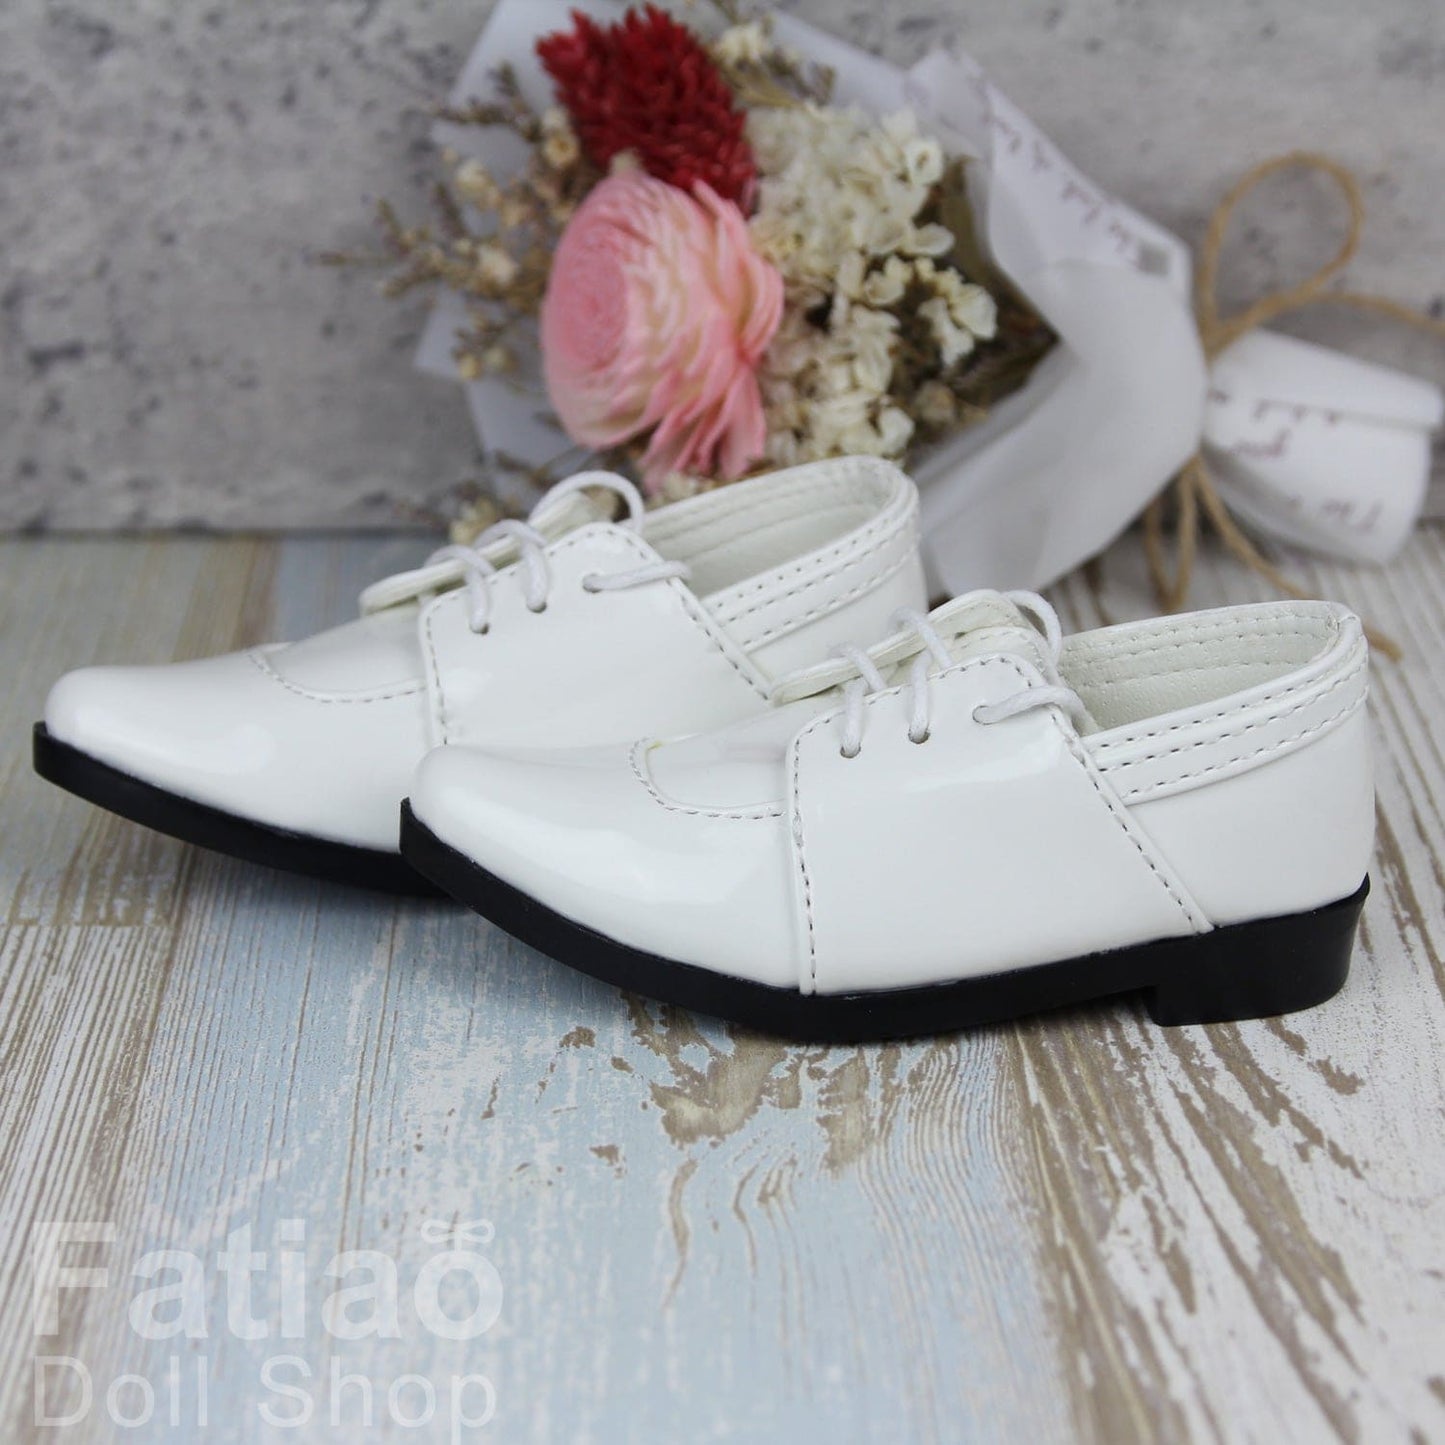 【Fatiao Doll Shop】Carved Pointed Toe Shoes 002-1 Multicolor / BJD SD13BOY 1/3 scale 